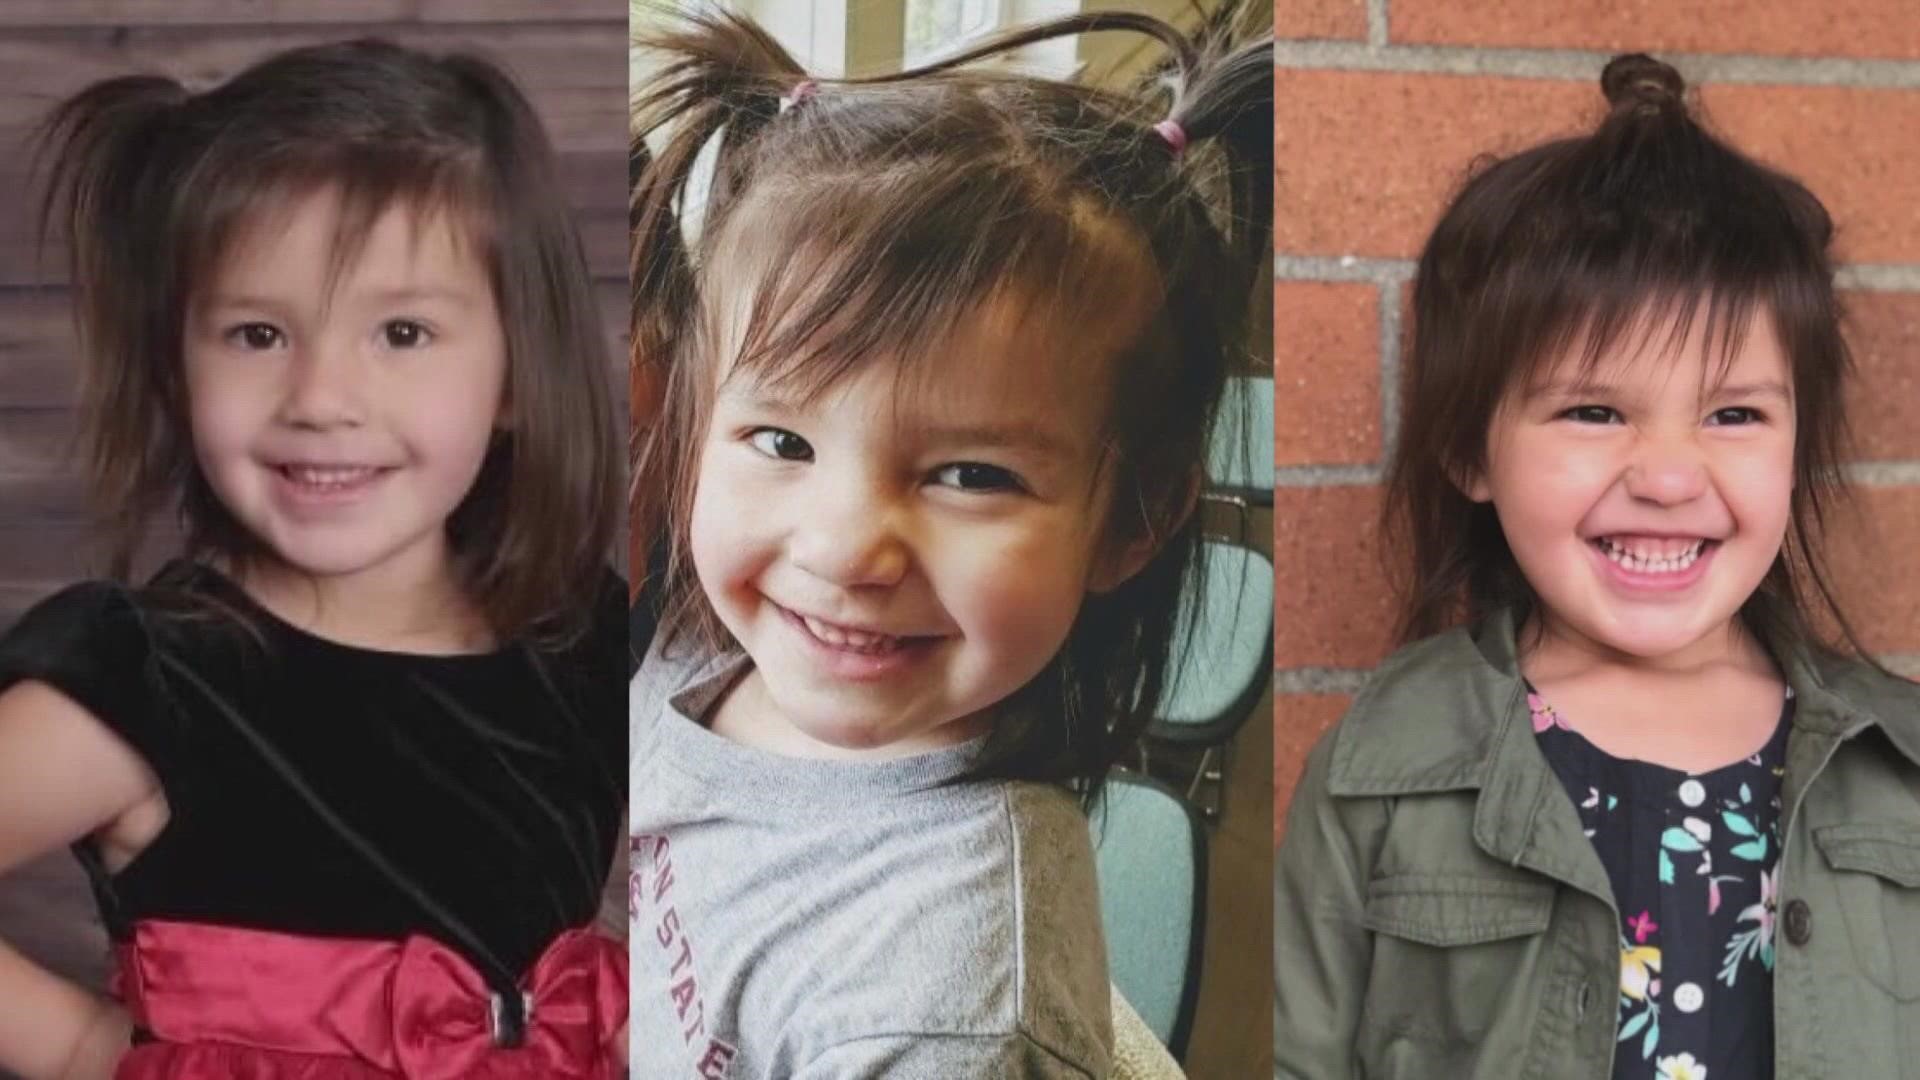 The missing 5-year-old from Gray's Harbor counting was last seen on February 10, 2021. However, she was not reported missing until 10 months later.